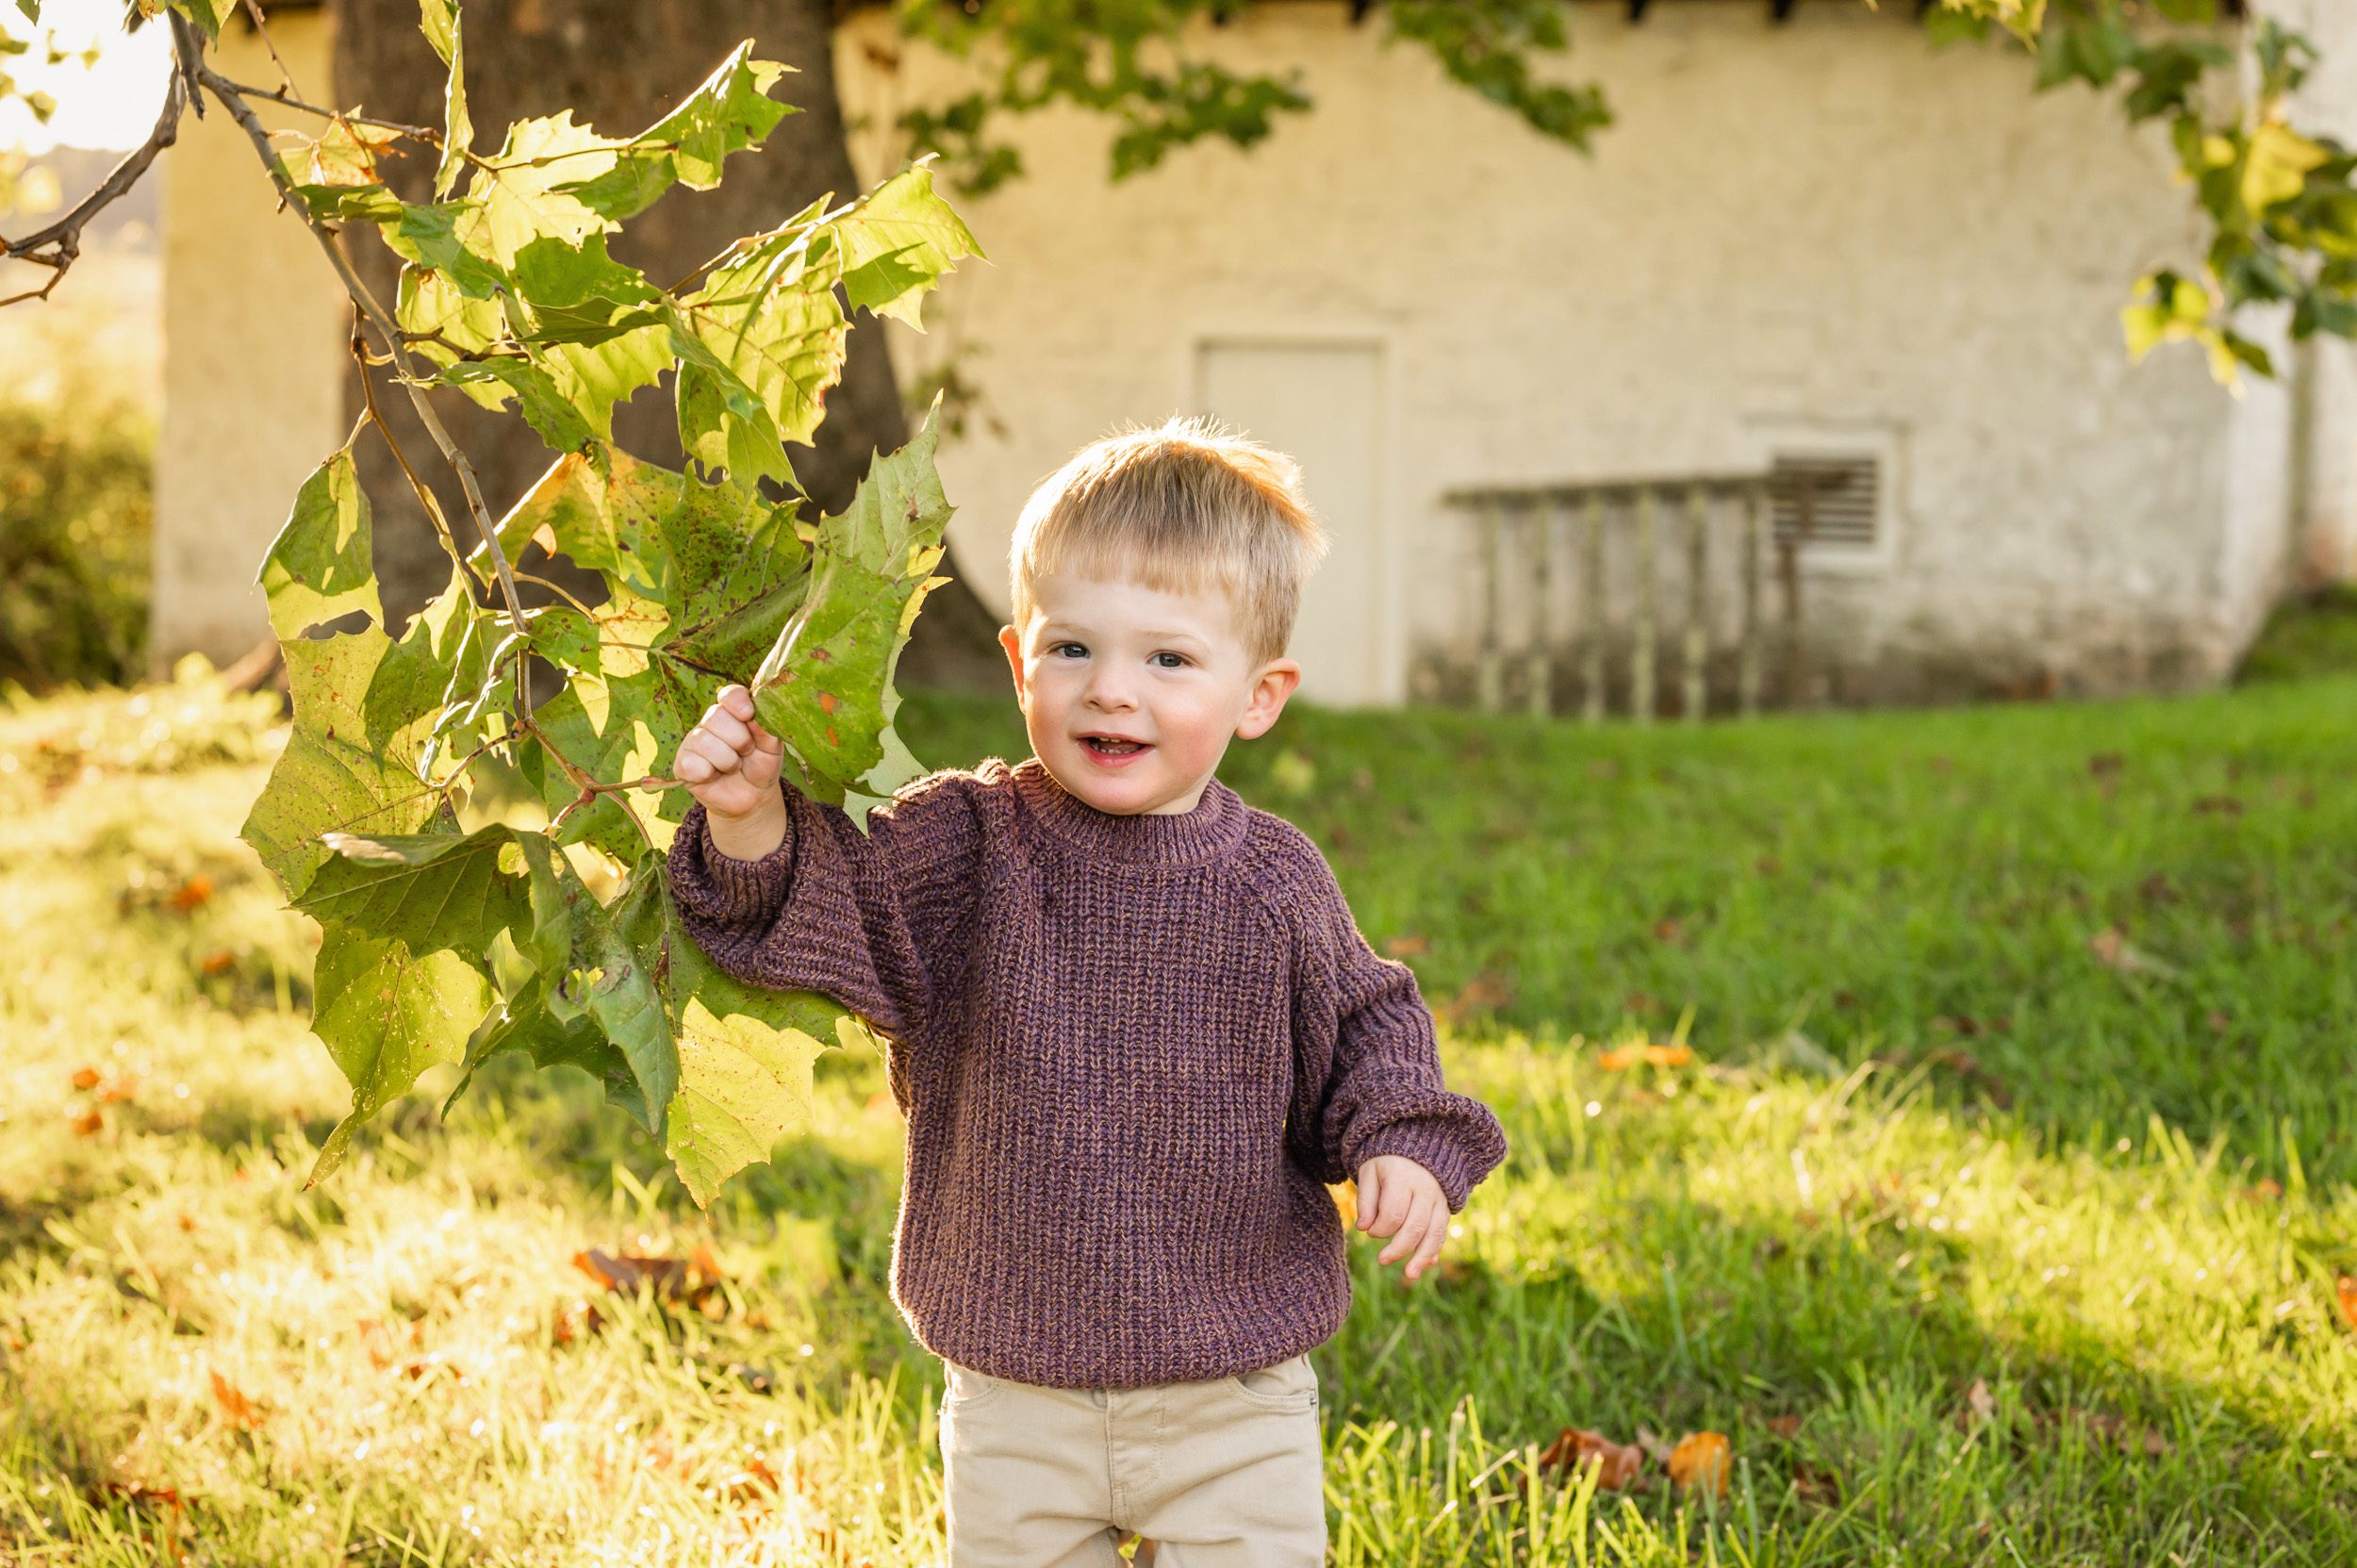 a young boy standing in the grass and holding up a leaf as he smiles at the camera during a family photo session